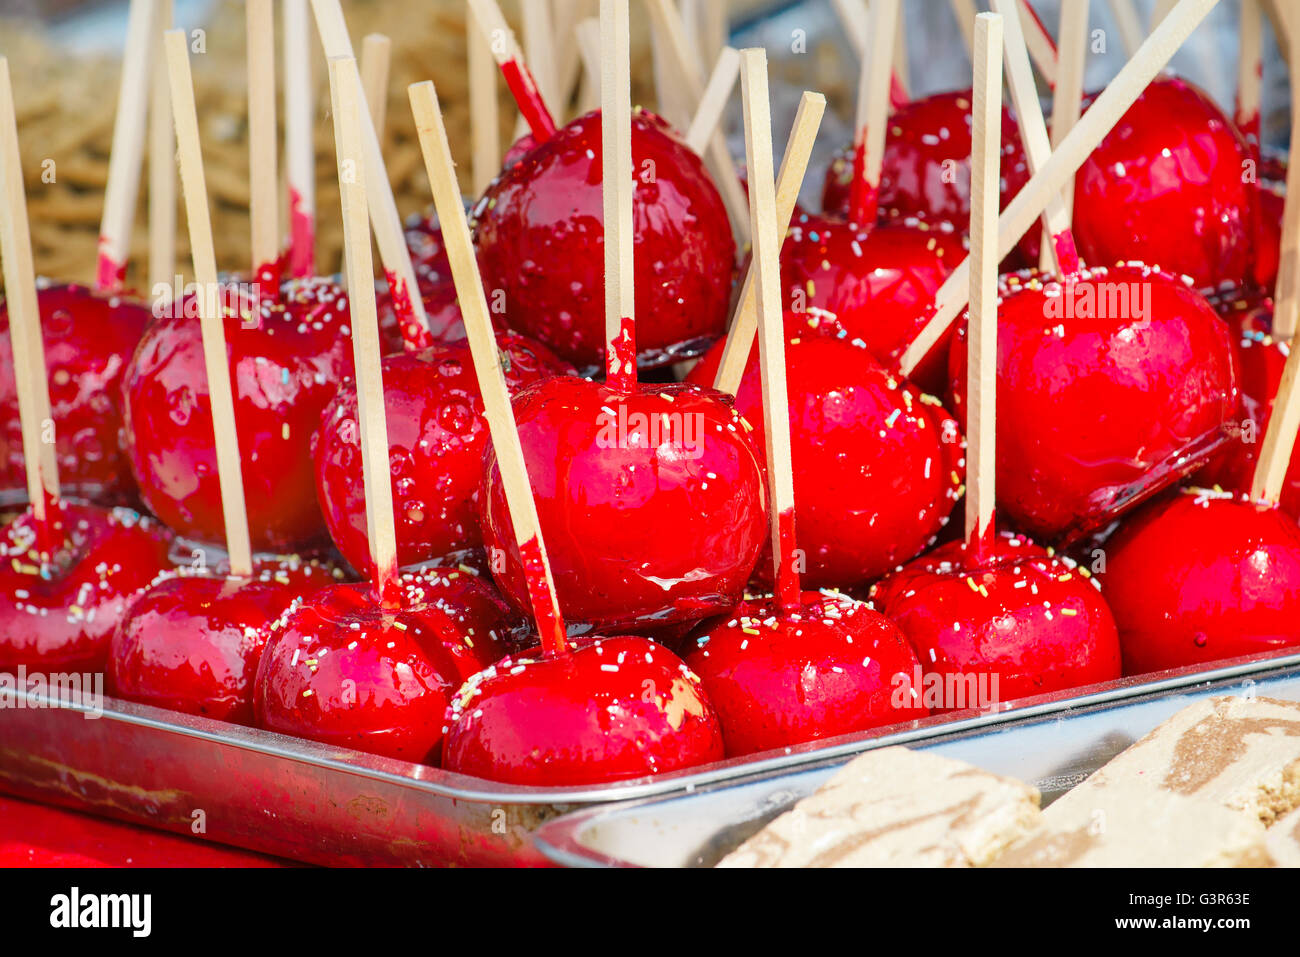 Sweet glazed red toffee candy apples on sticks for sale on farmer market or country fair. Stock Photo